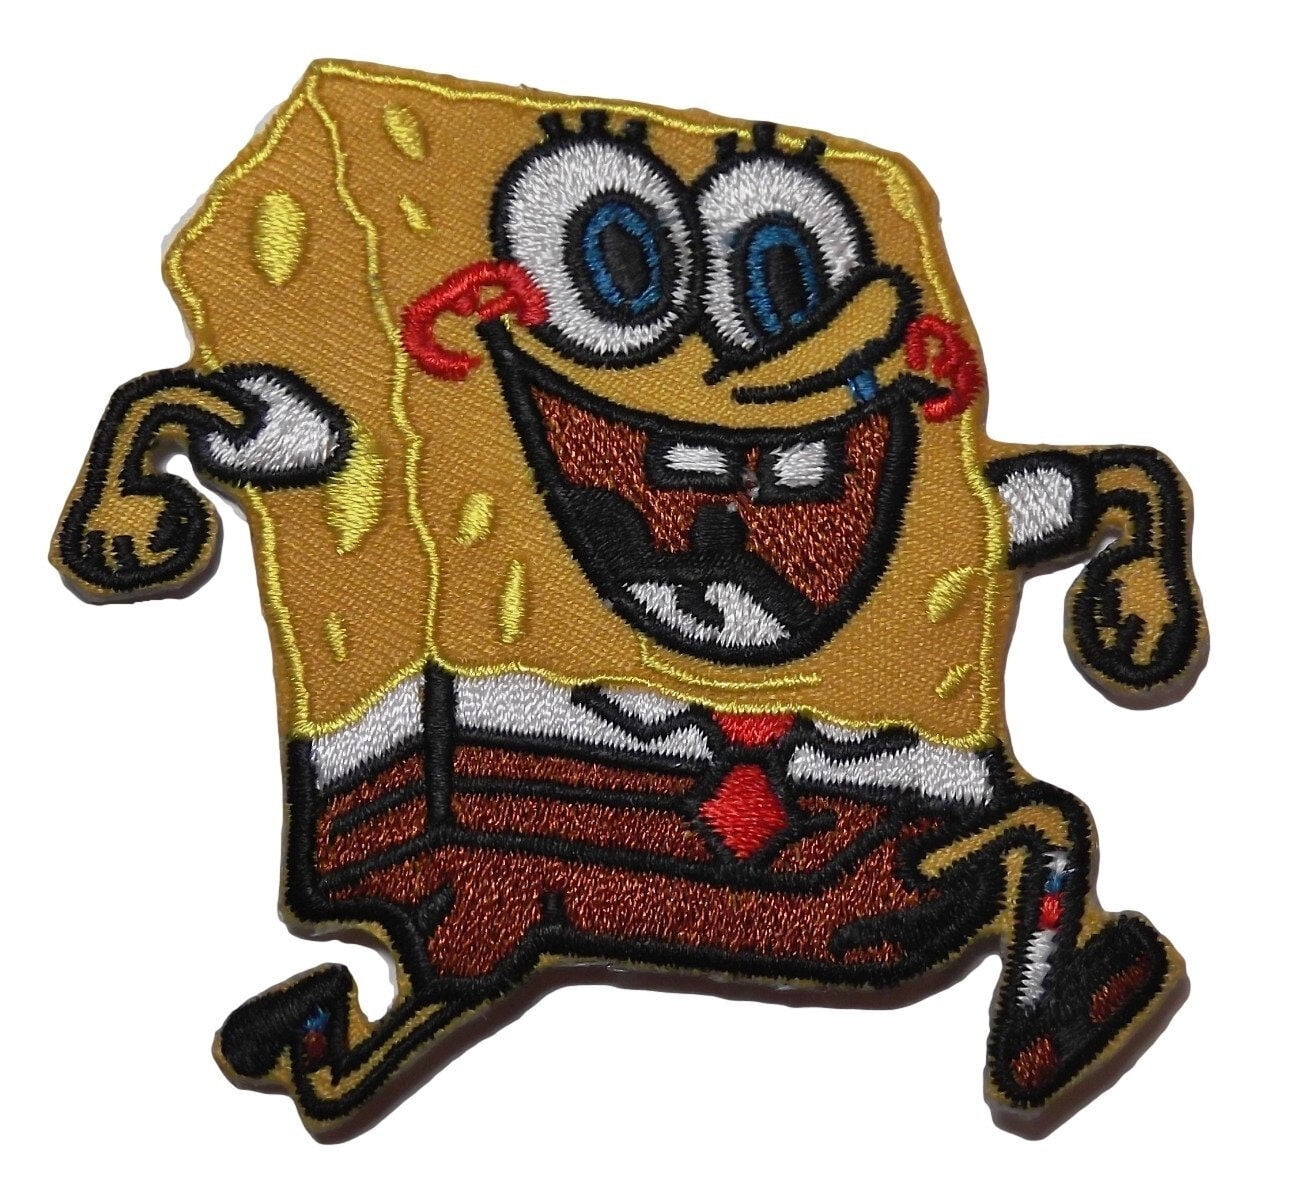 SpongeBob SquarePants Embroidered Patch Embroidery Patches Badge Iron Sew On